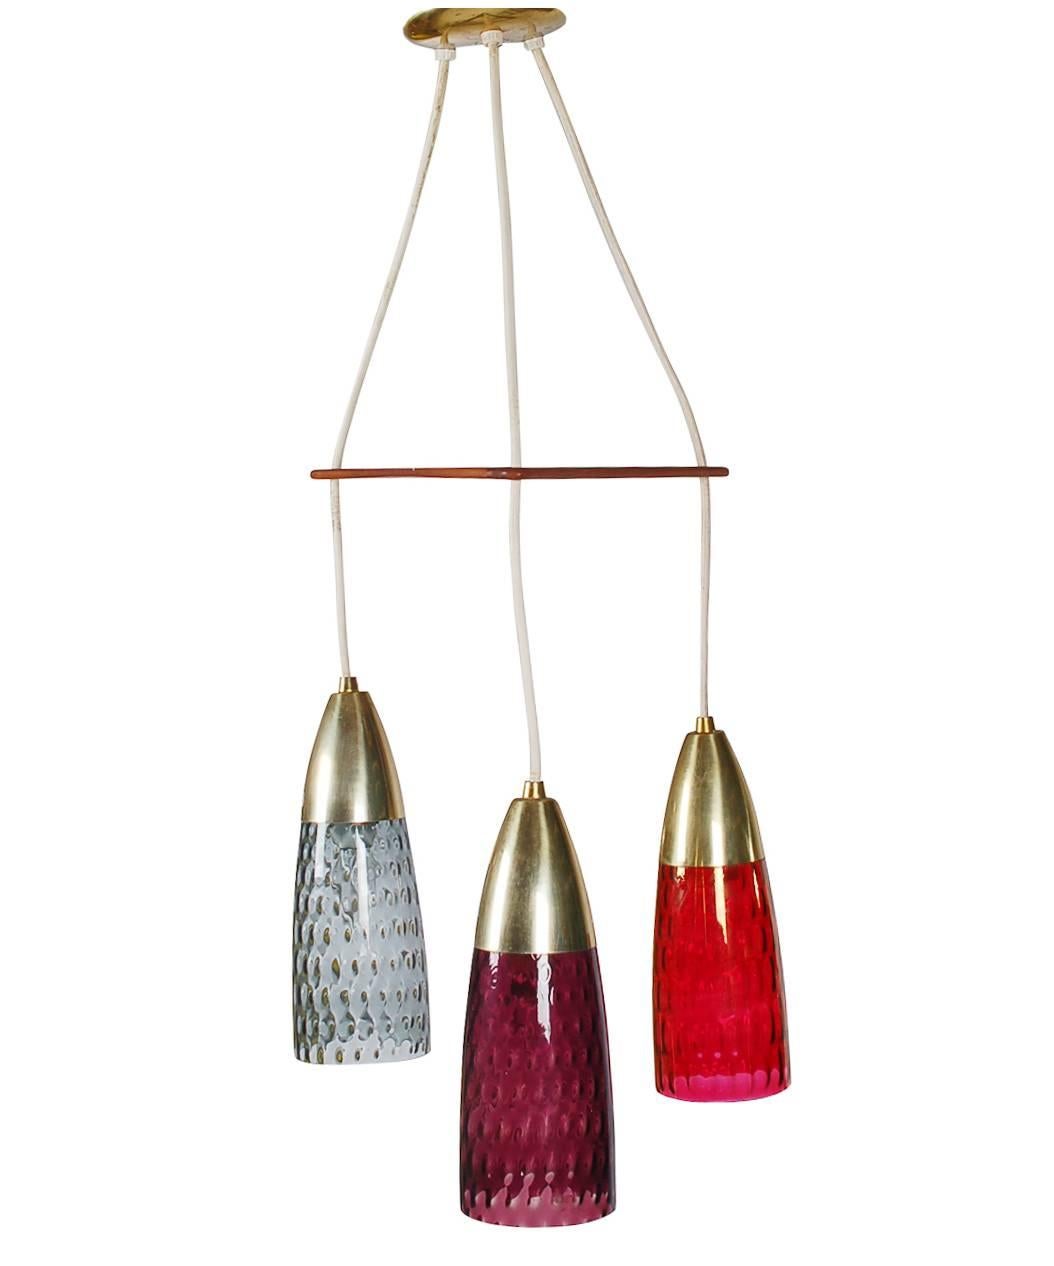 A beautiful hanging lamp that consists of three multicolored glass shades, along with complimentary brass and teak details. Probably Scandinavian made. Each light can be hung at individual lengths (shown at maximum length). Takes three standard